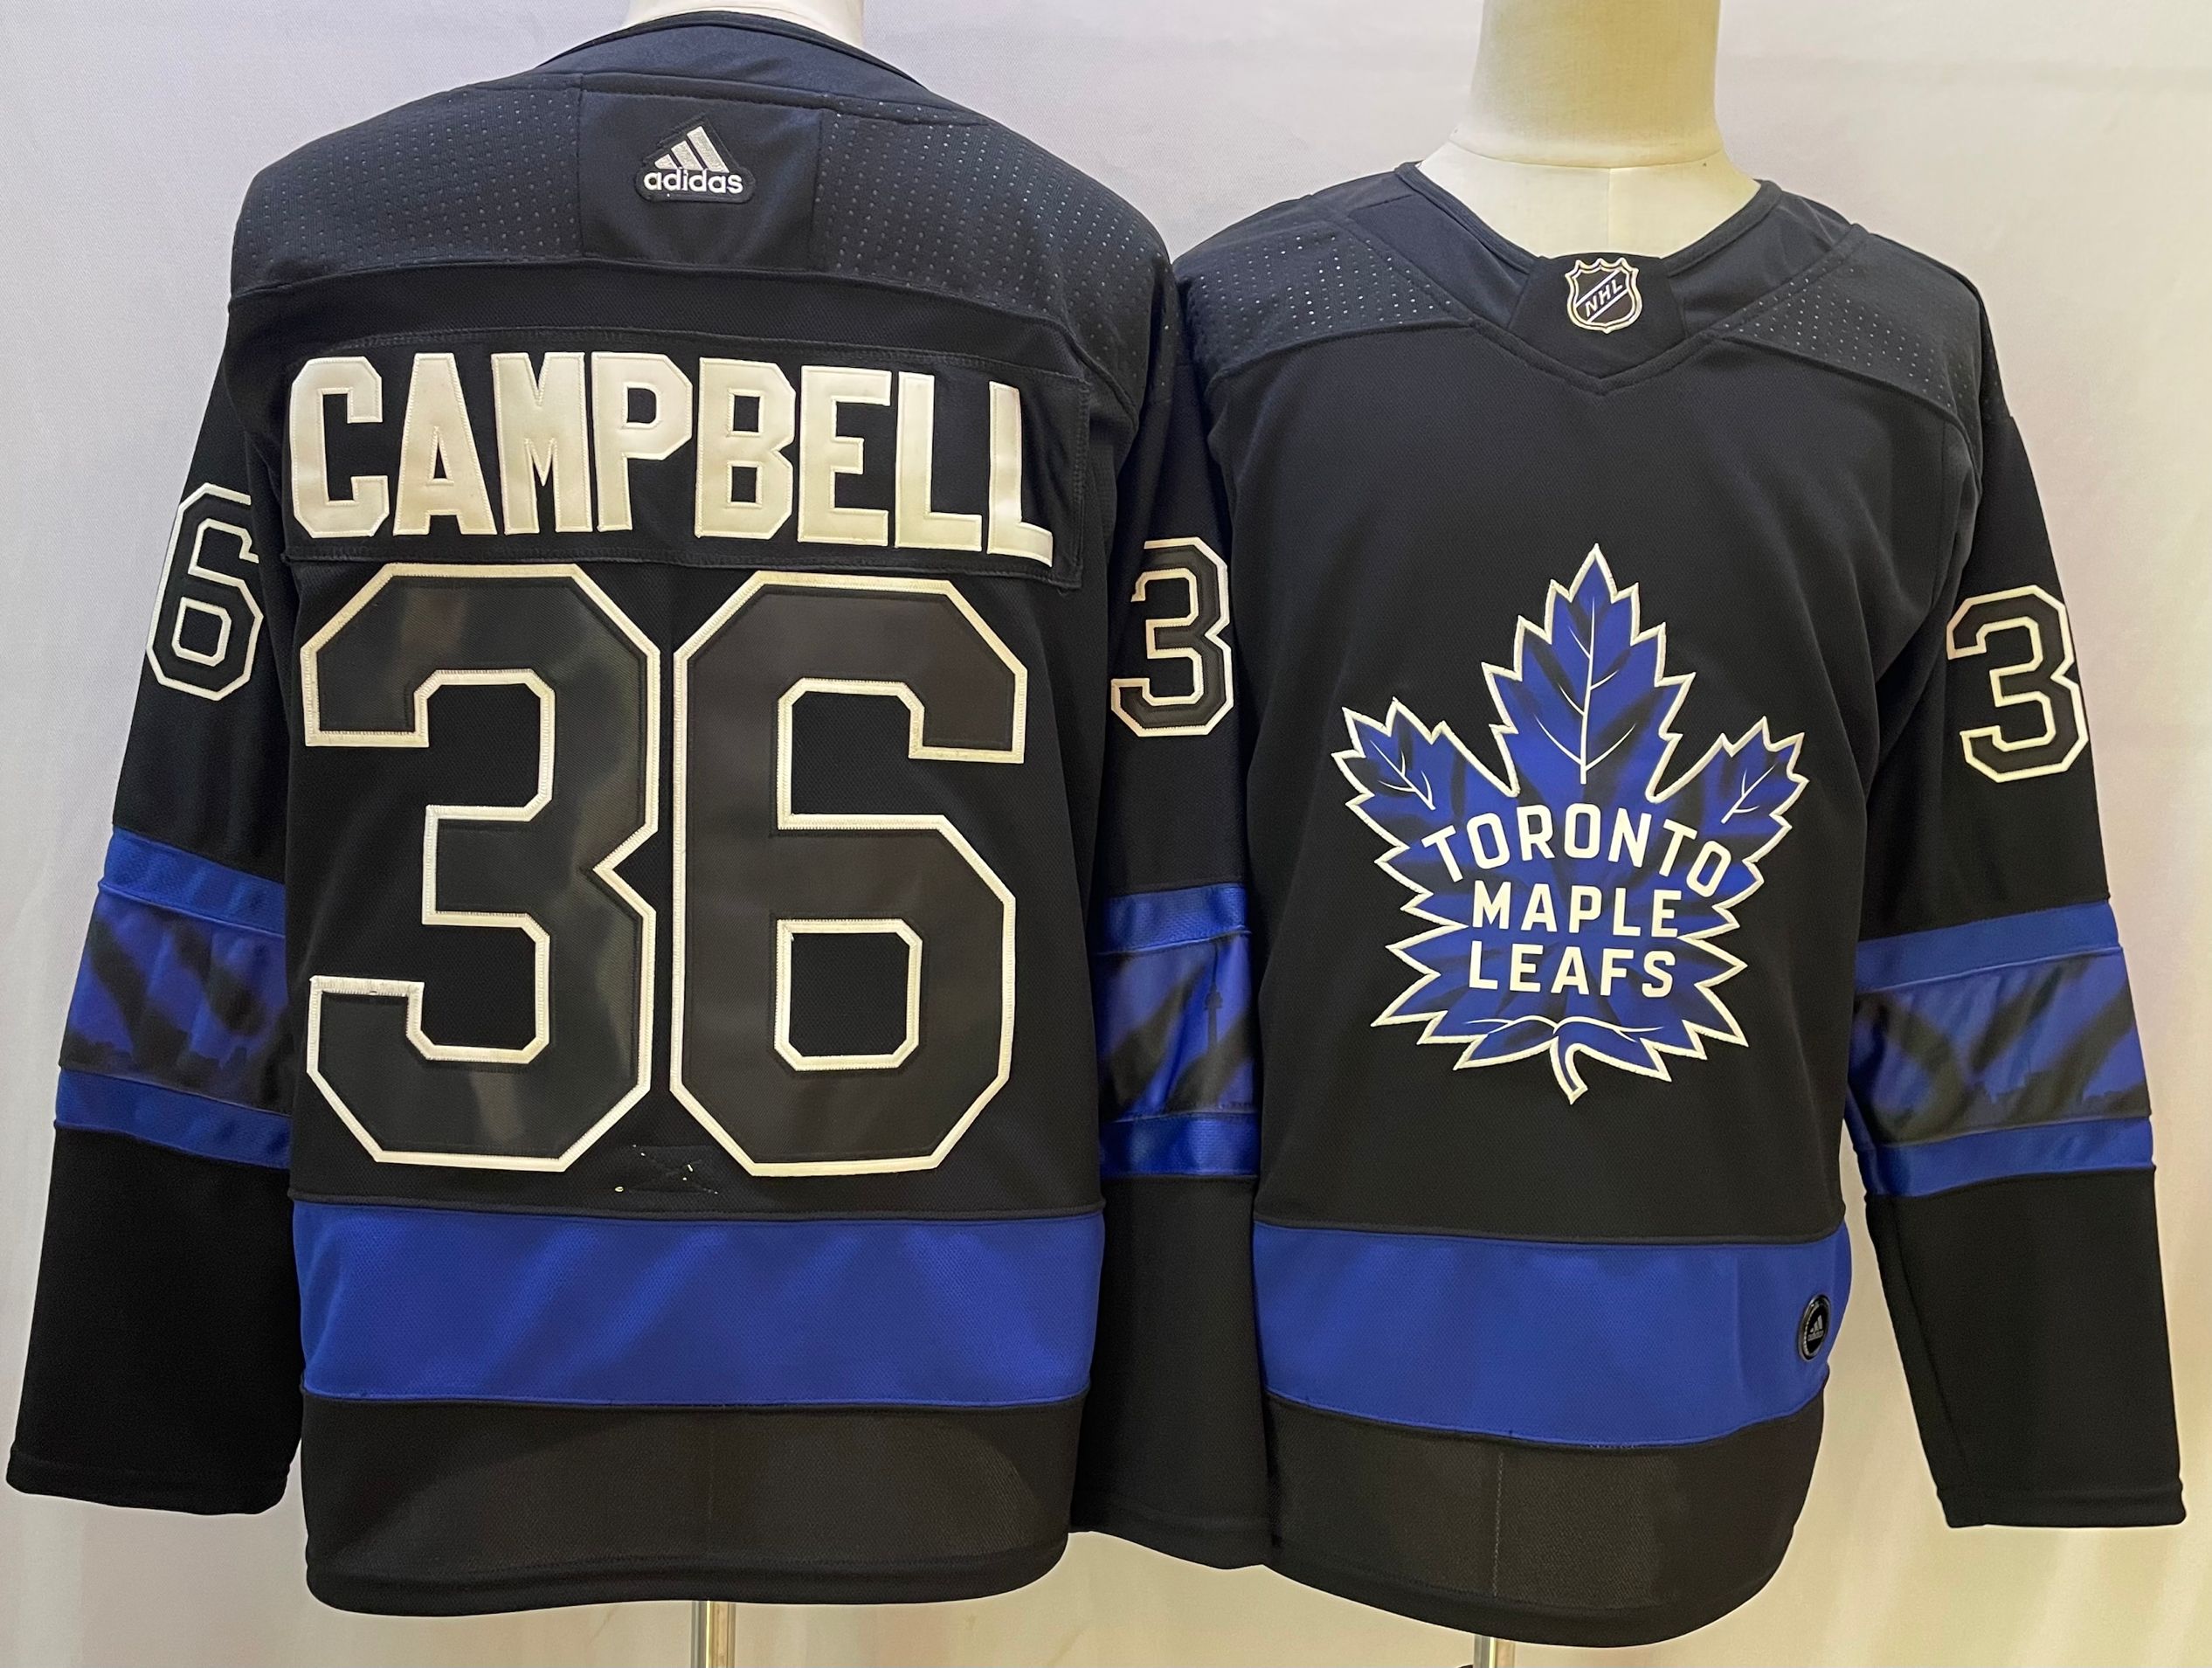 Toronto Maple Leafs #36 Jack Campbell Black X Drew House Inside Out Stitched Jersey